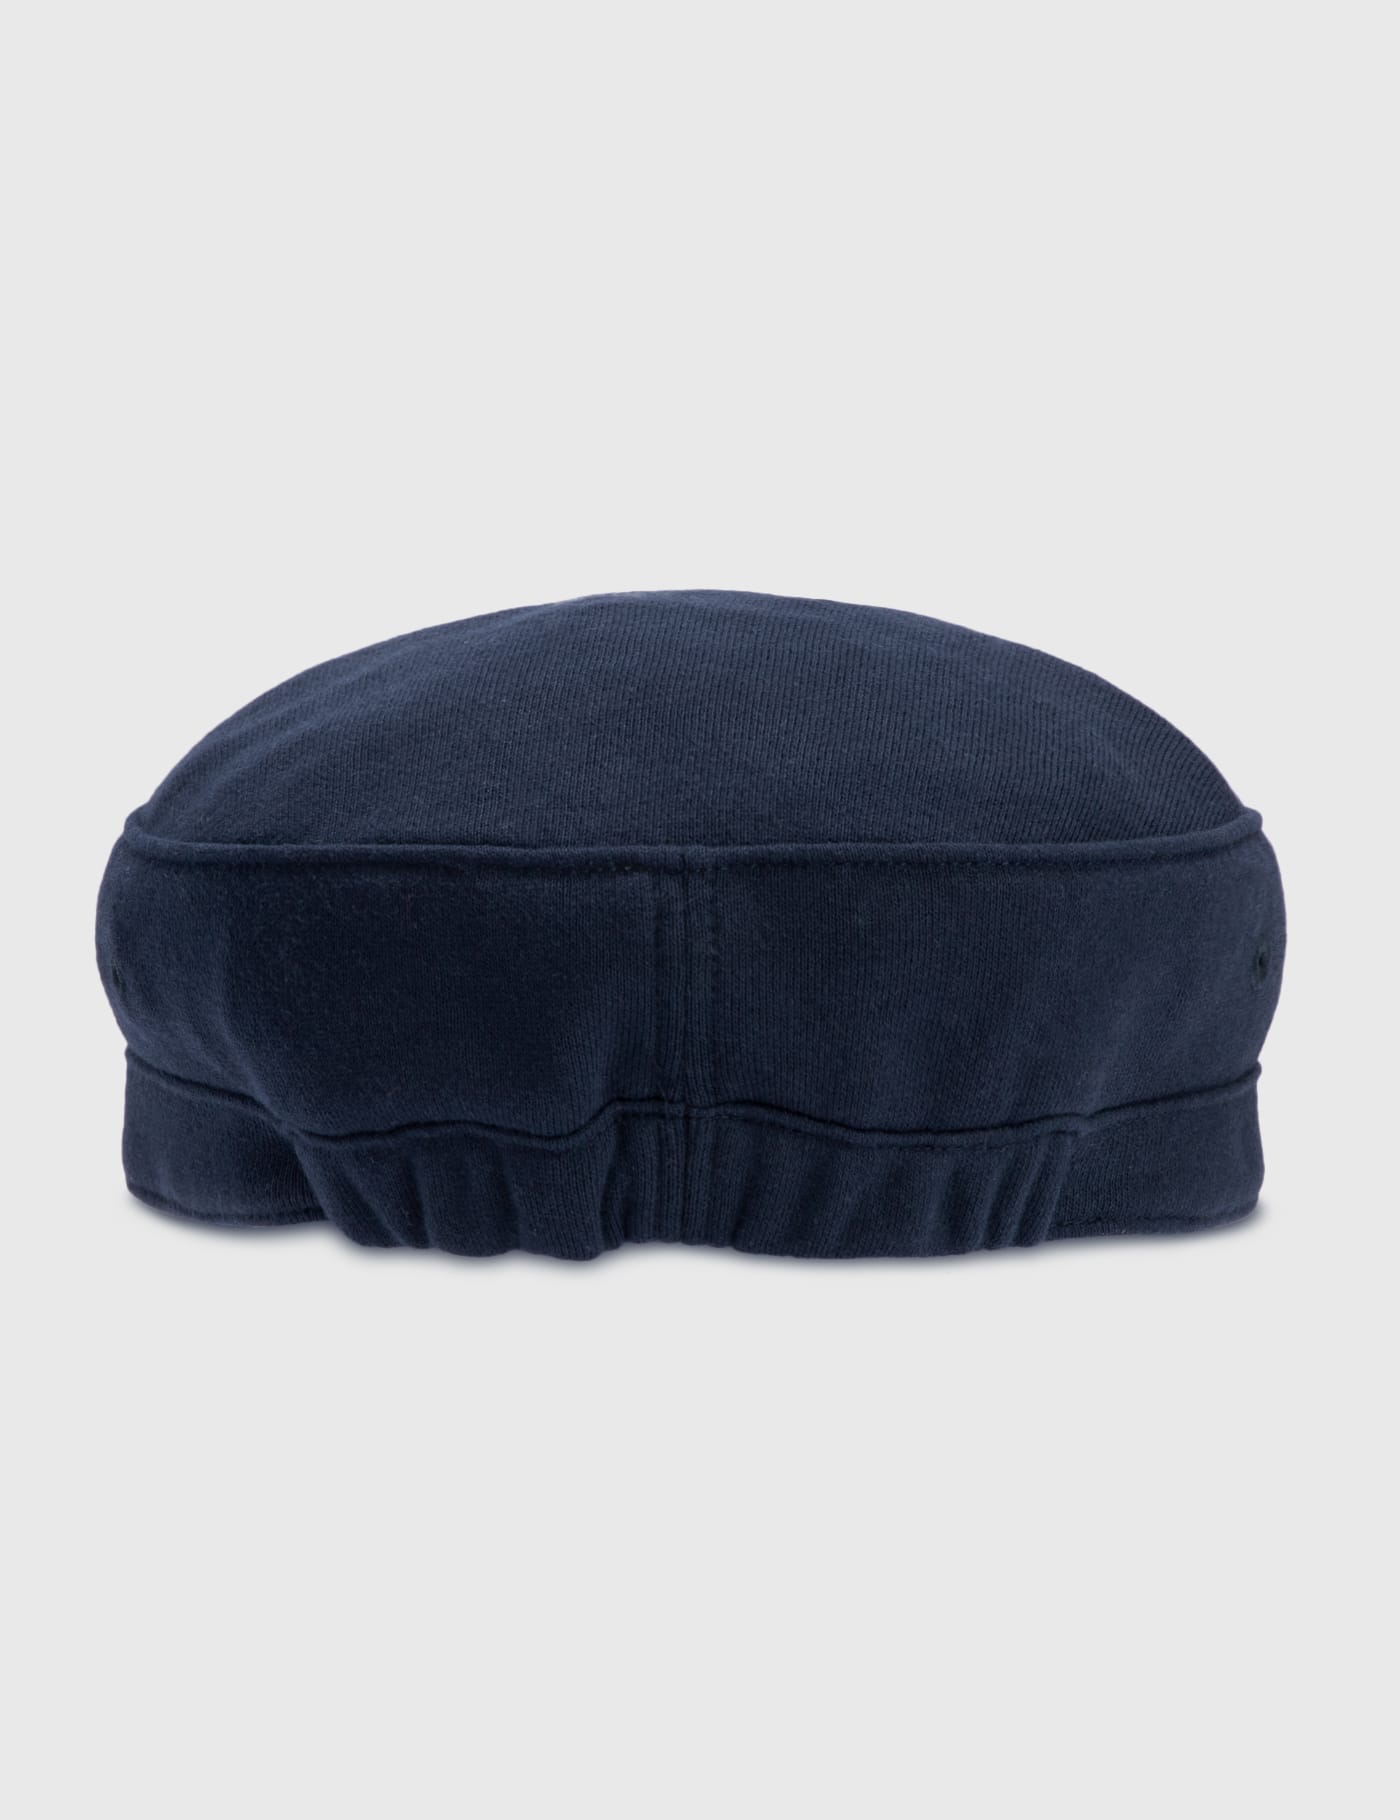 Human Made - SWEAT MIL CAP | HBX - Globally Curated Fashion and ...